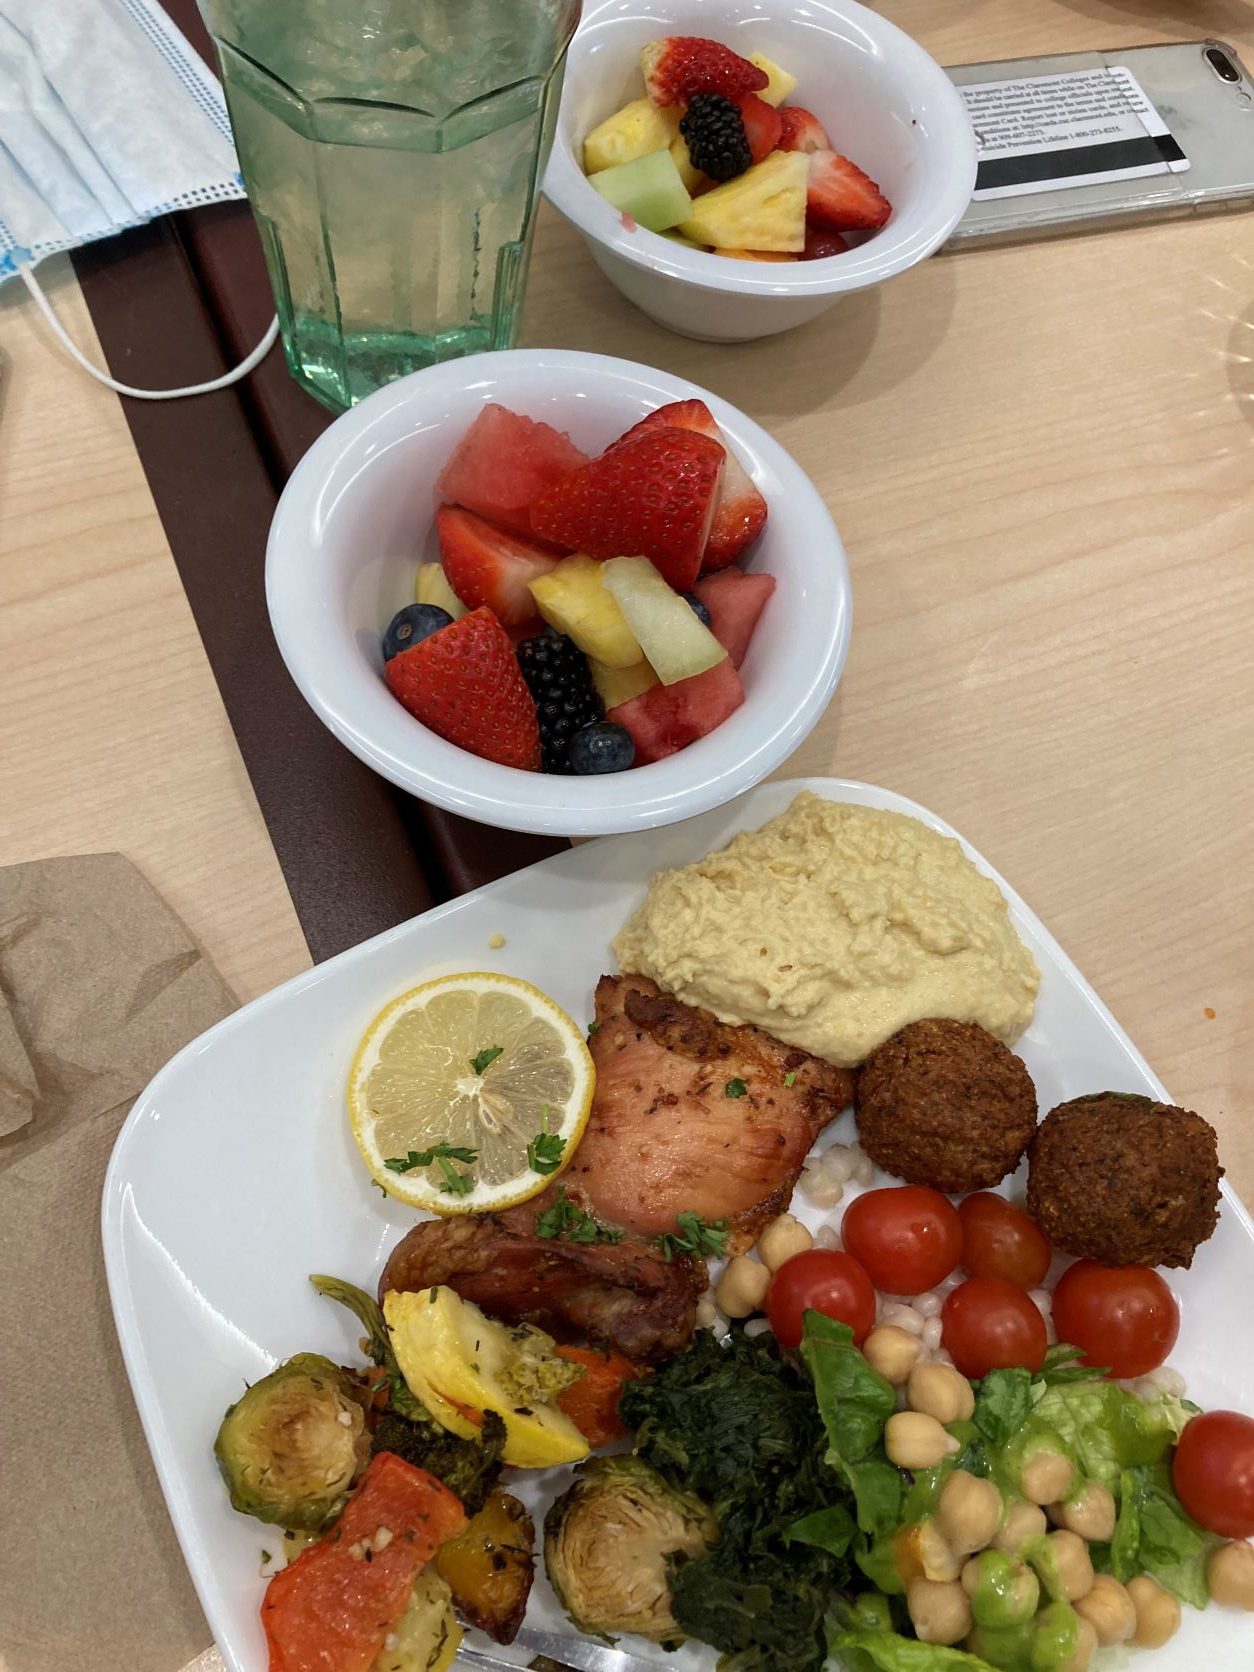 A small bowl of fruit next to a plate with a selection of salmon, bread, vegetables, and falafel